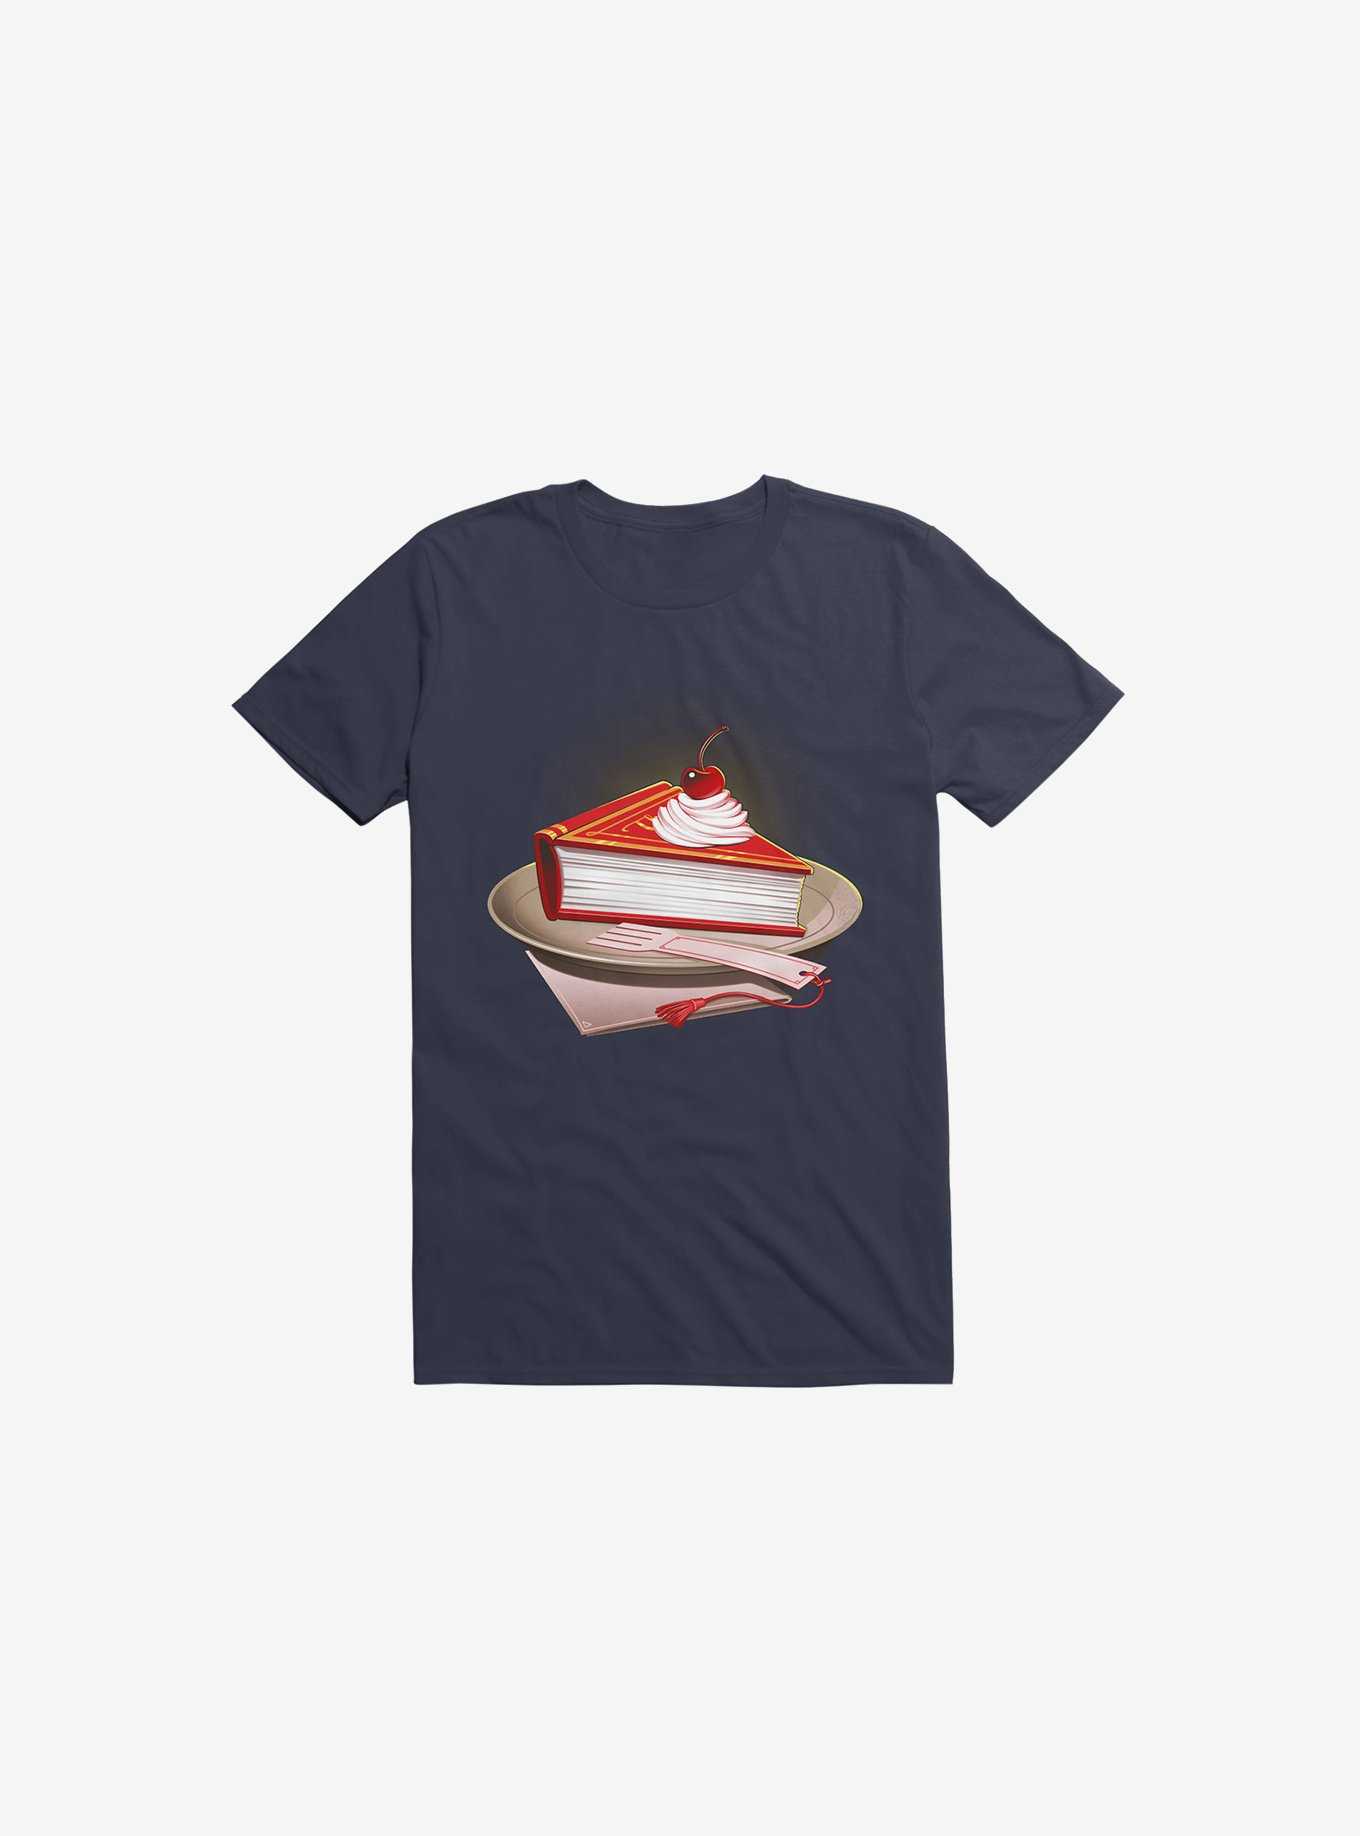 Food For The Brain Navy Blue T-Shirt, , hi-res